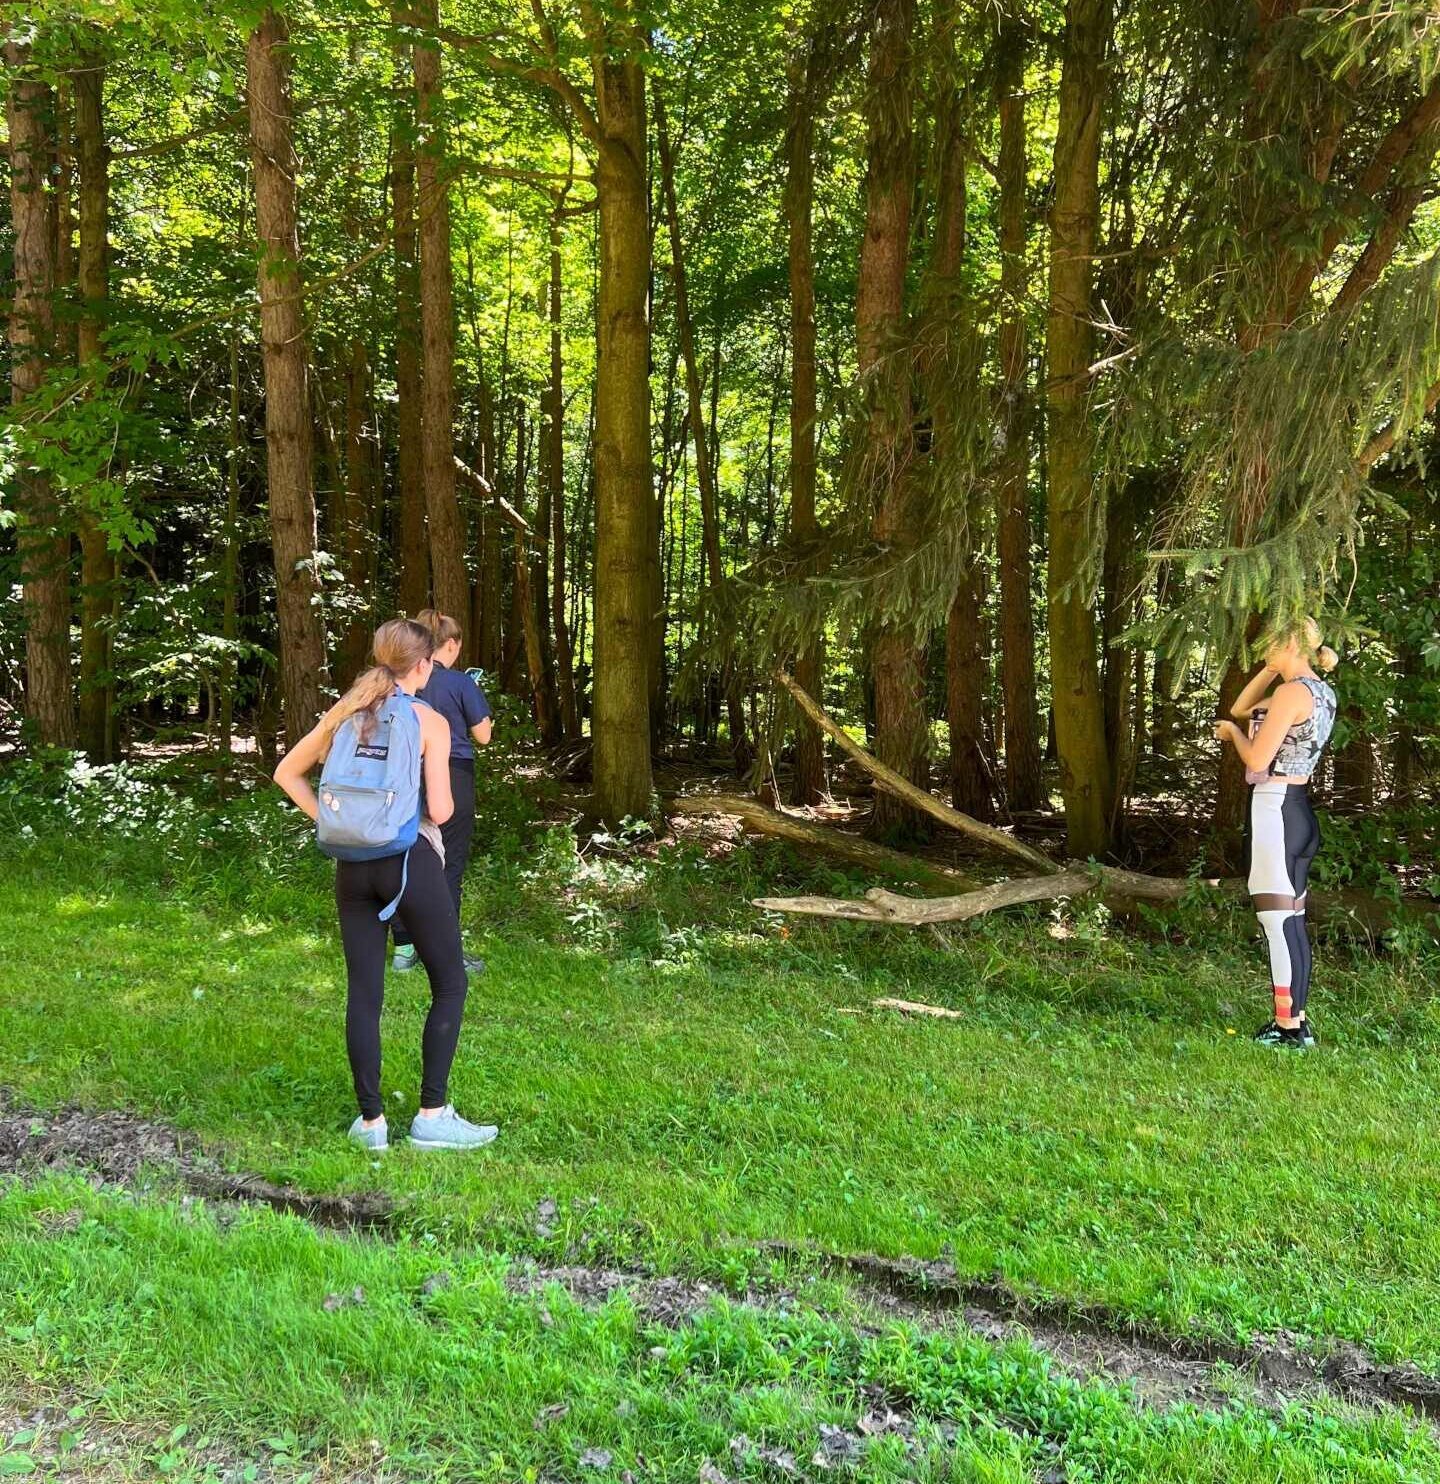 Students in a wooded area.